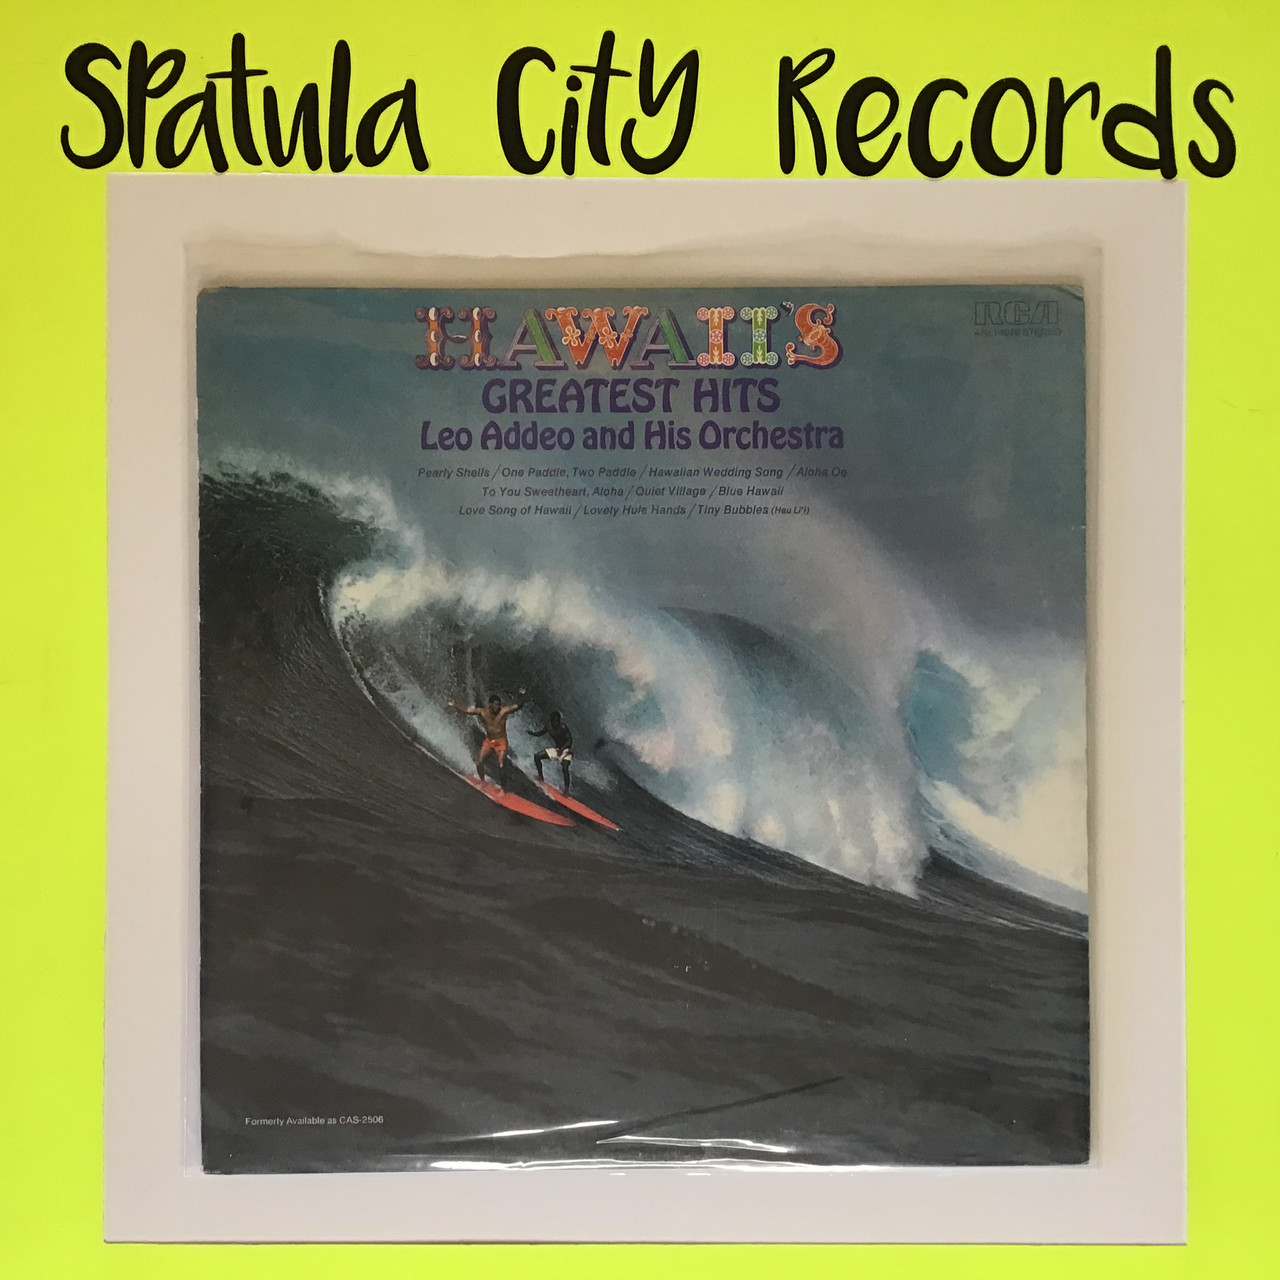 Leo Addeo And His Orchestra - Hawaii's Greatest Hits - vinyl record LP